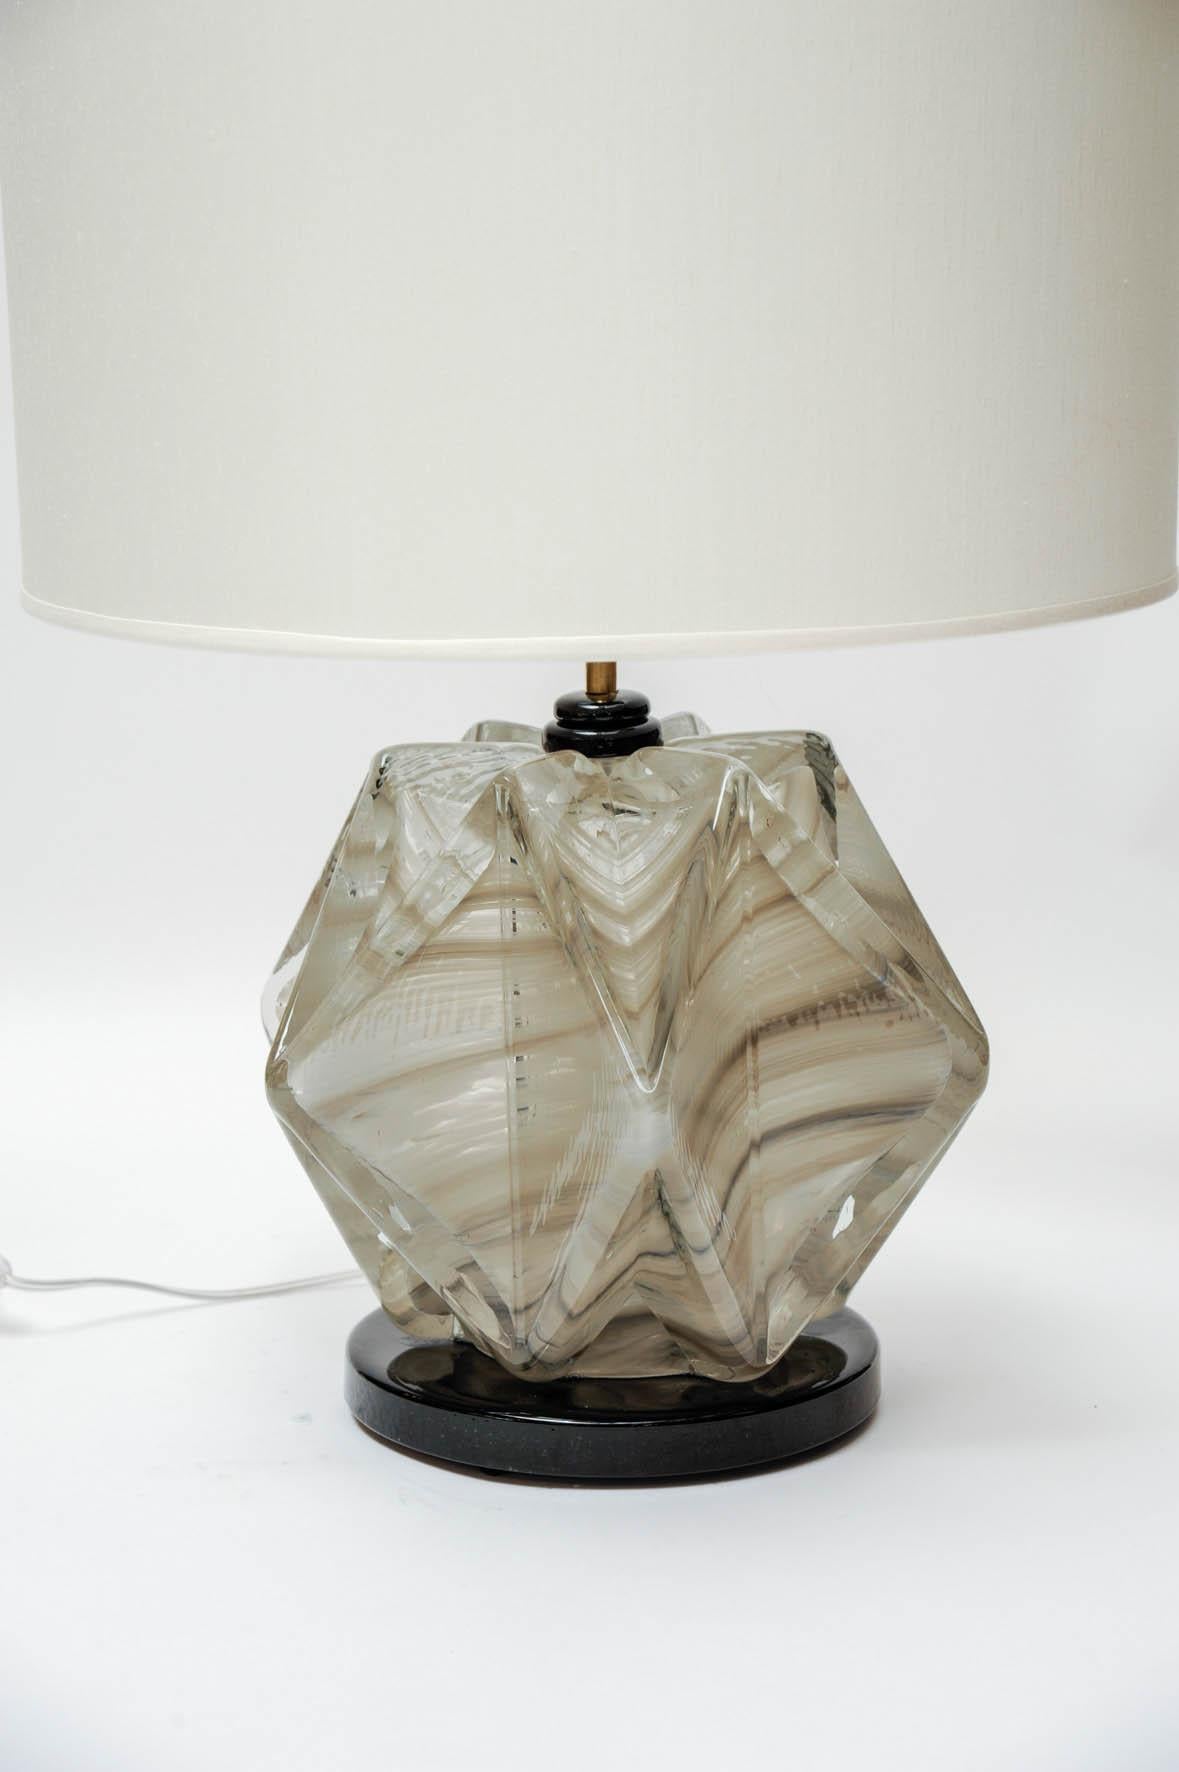 Pair of circular table lamps made of a round black foot and glass body with diamond shapes tinted with hints of grey and brown.